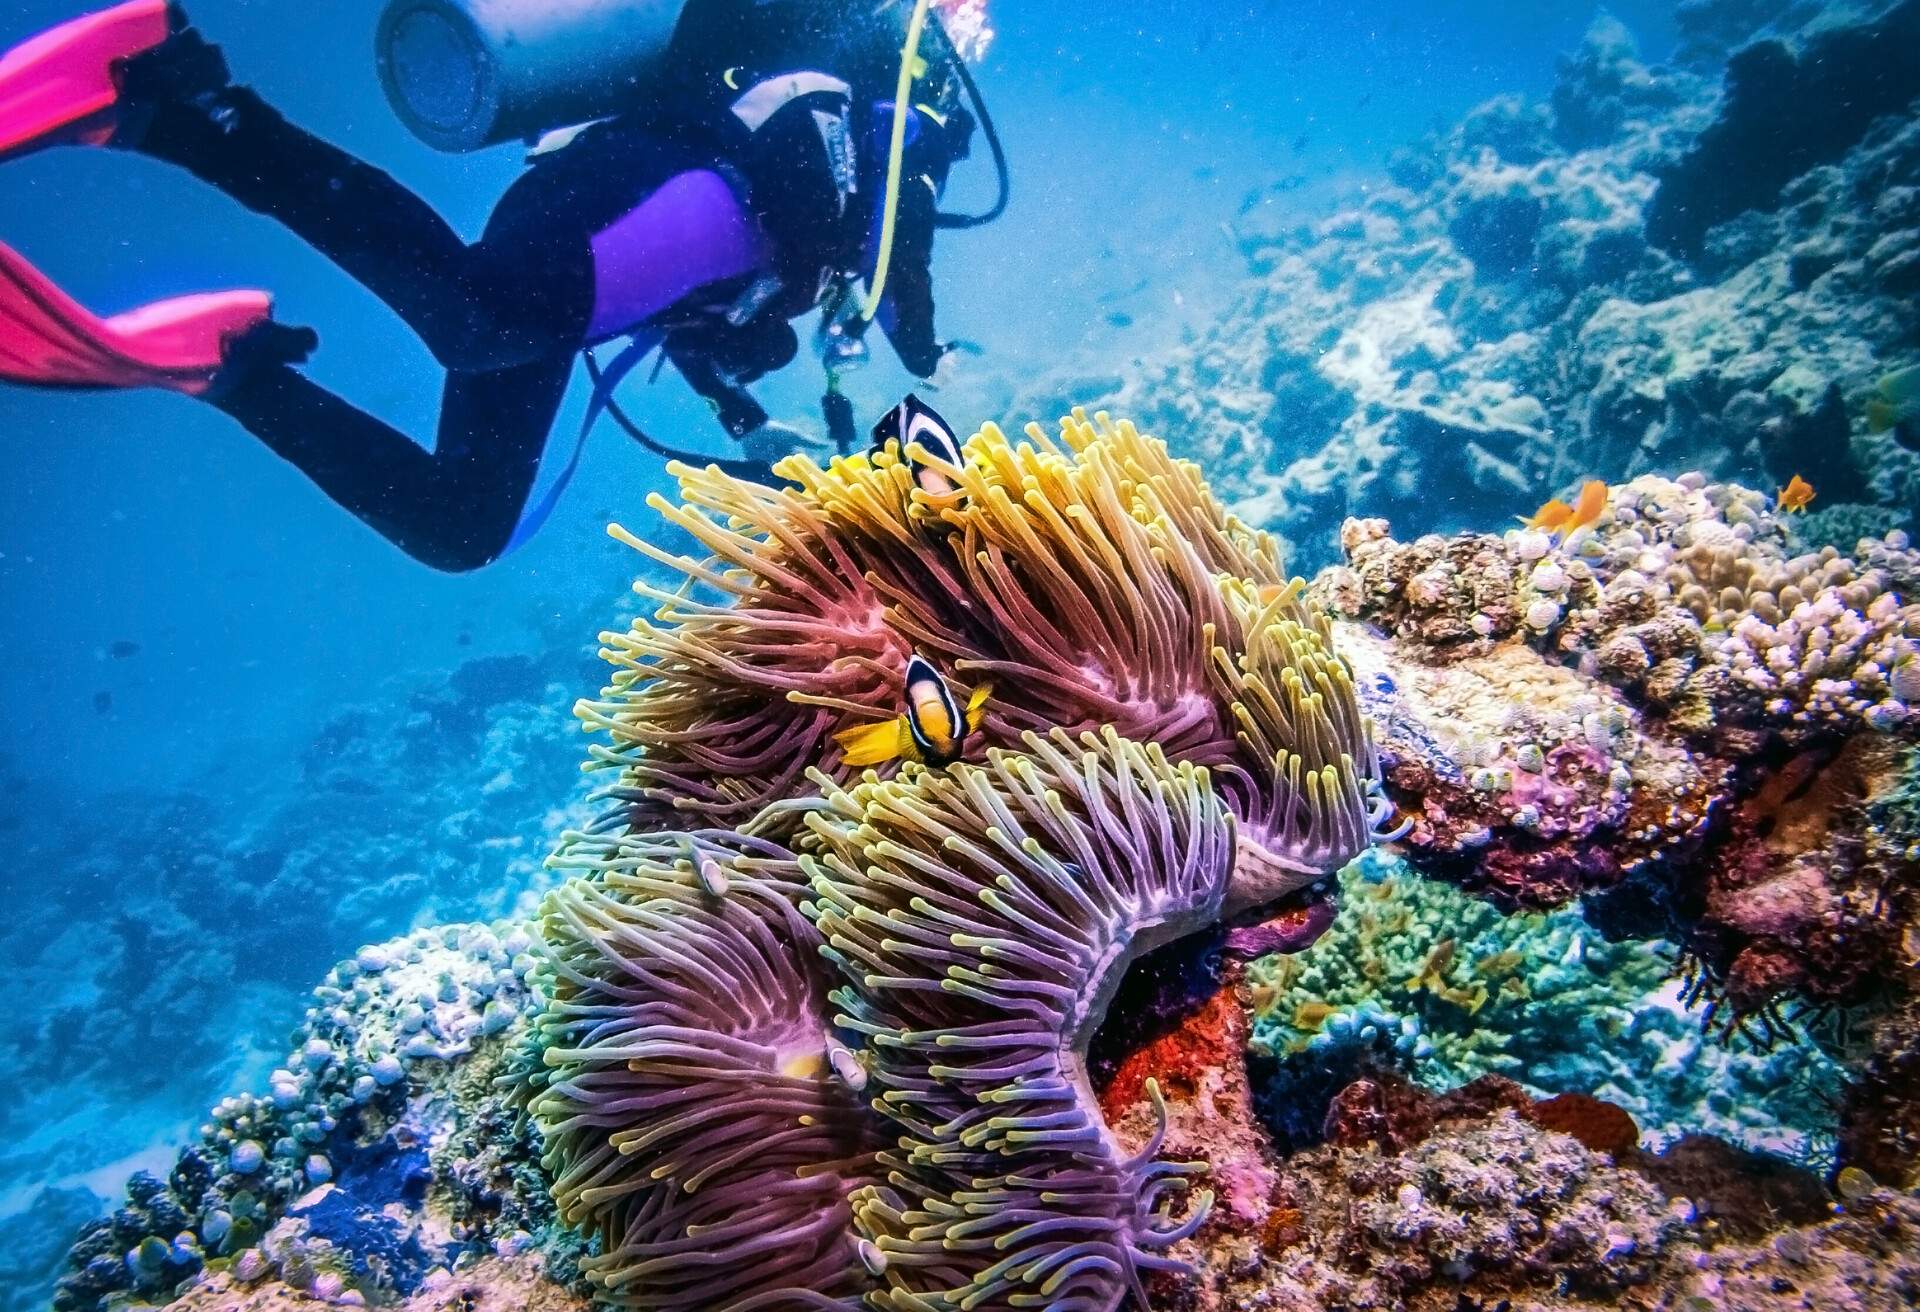 A person scuba diving among the beautiful reef at the bottom of the ocean.